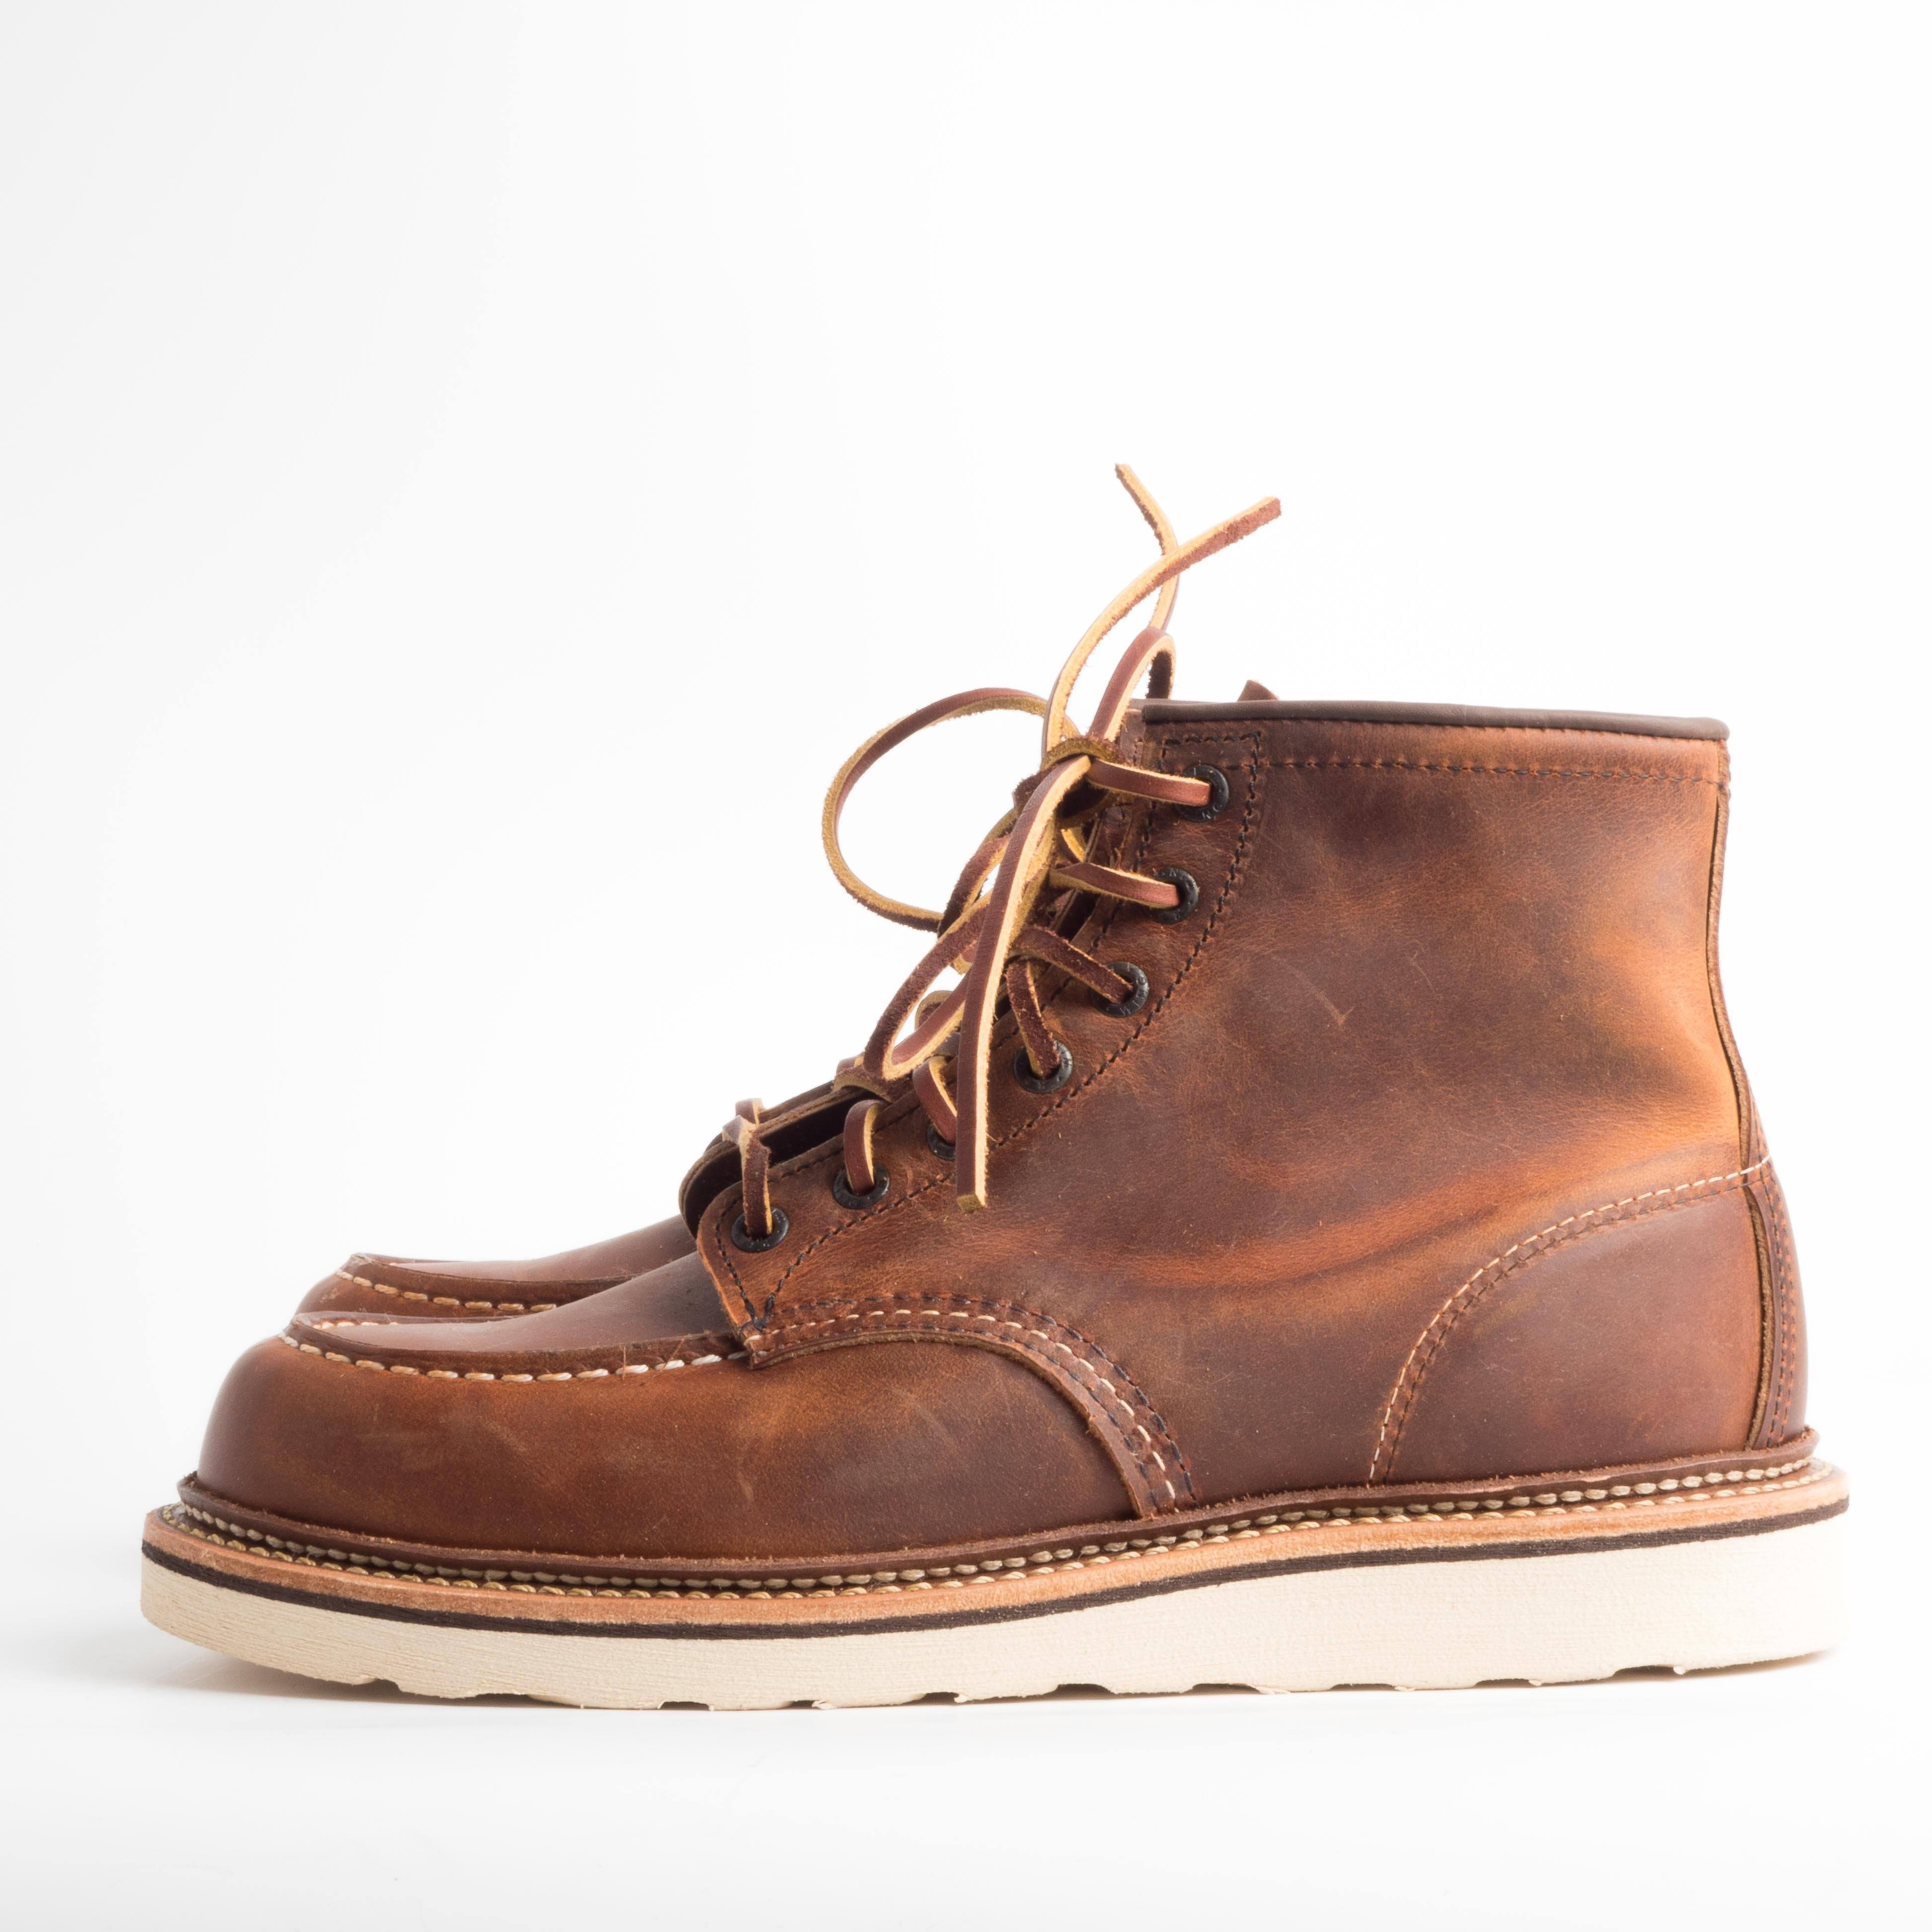 RED WING SHOES - Polacco Classic Moc Toe 1907 - Rough Copper